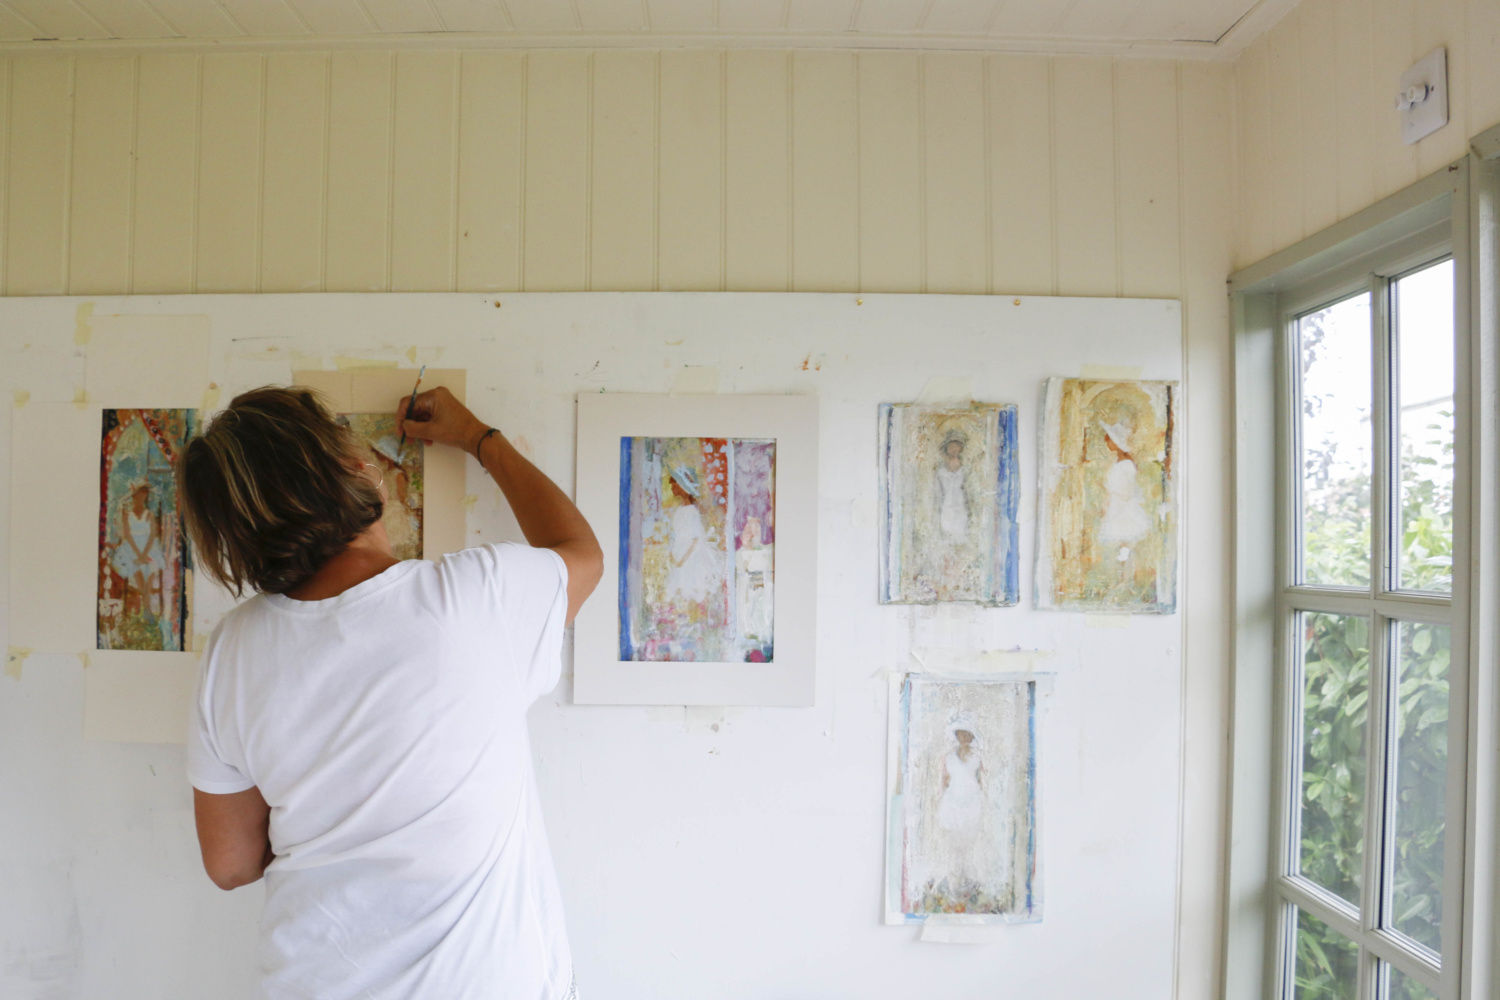 Sally-Anne uses her ShofficePlus as her artist's studio. Situated at the end of the garden, her retreat can be enjoyed by the whole family whilst she paints. Read her case study on Garden Escape by Malvern Garden Buildings.